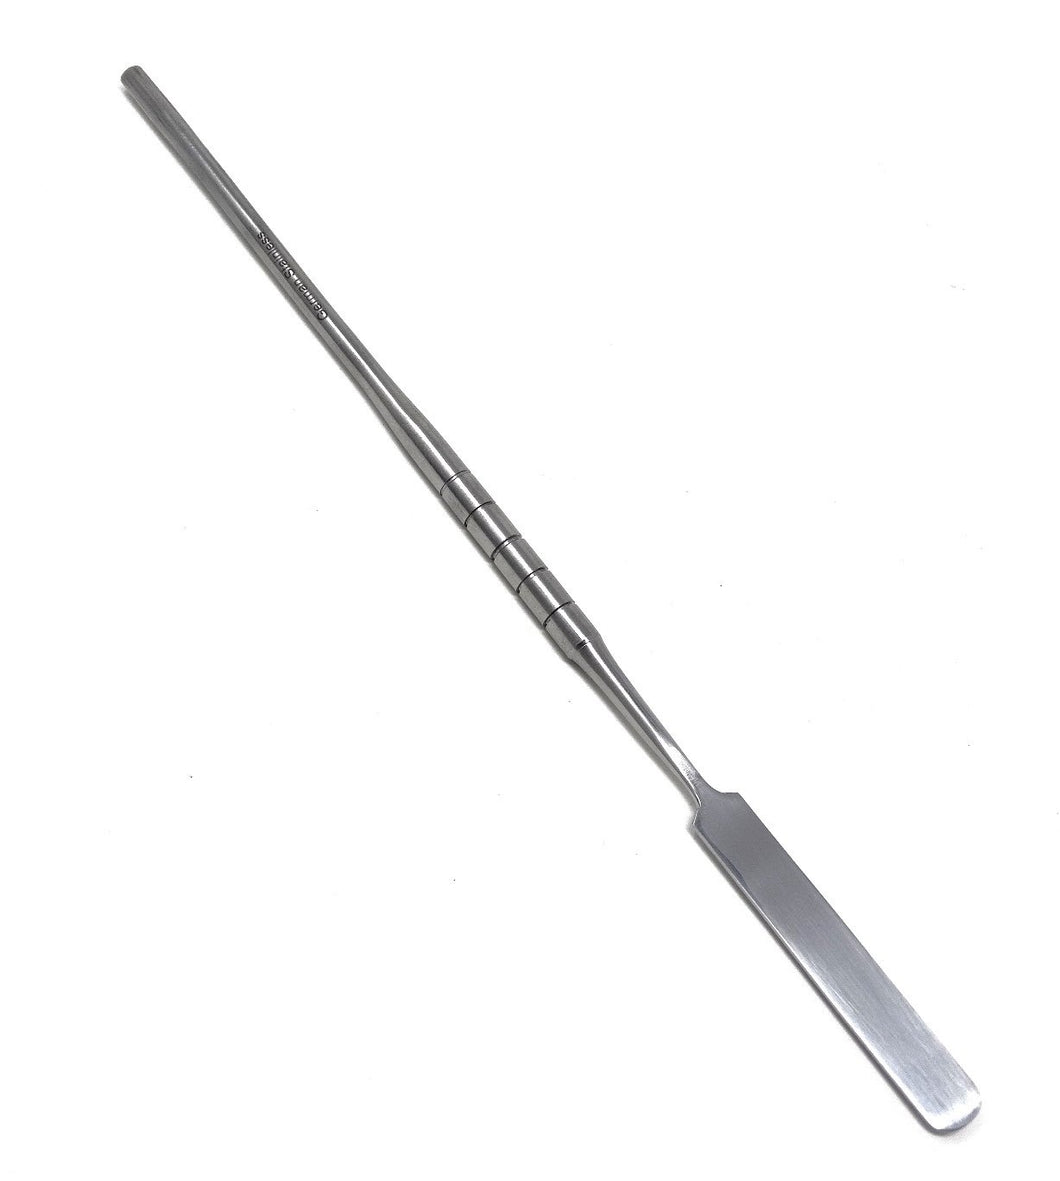 Dental Cement Lab Mixing Wax Modeling Spatula #24A, Stainless Steel Instruments, Length 7.25